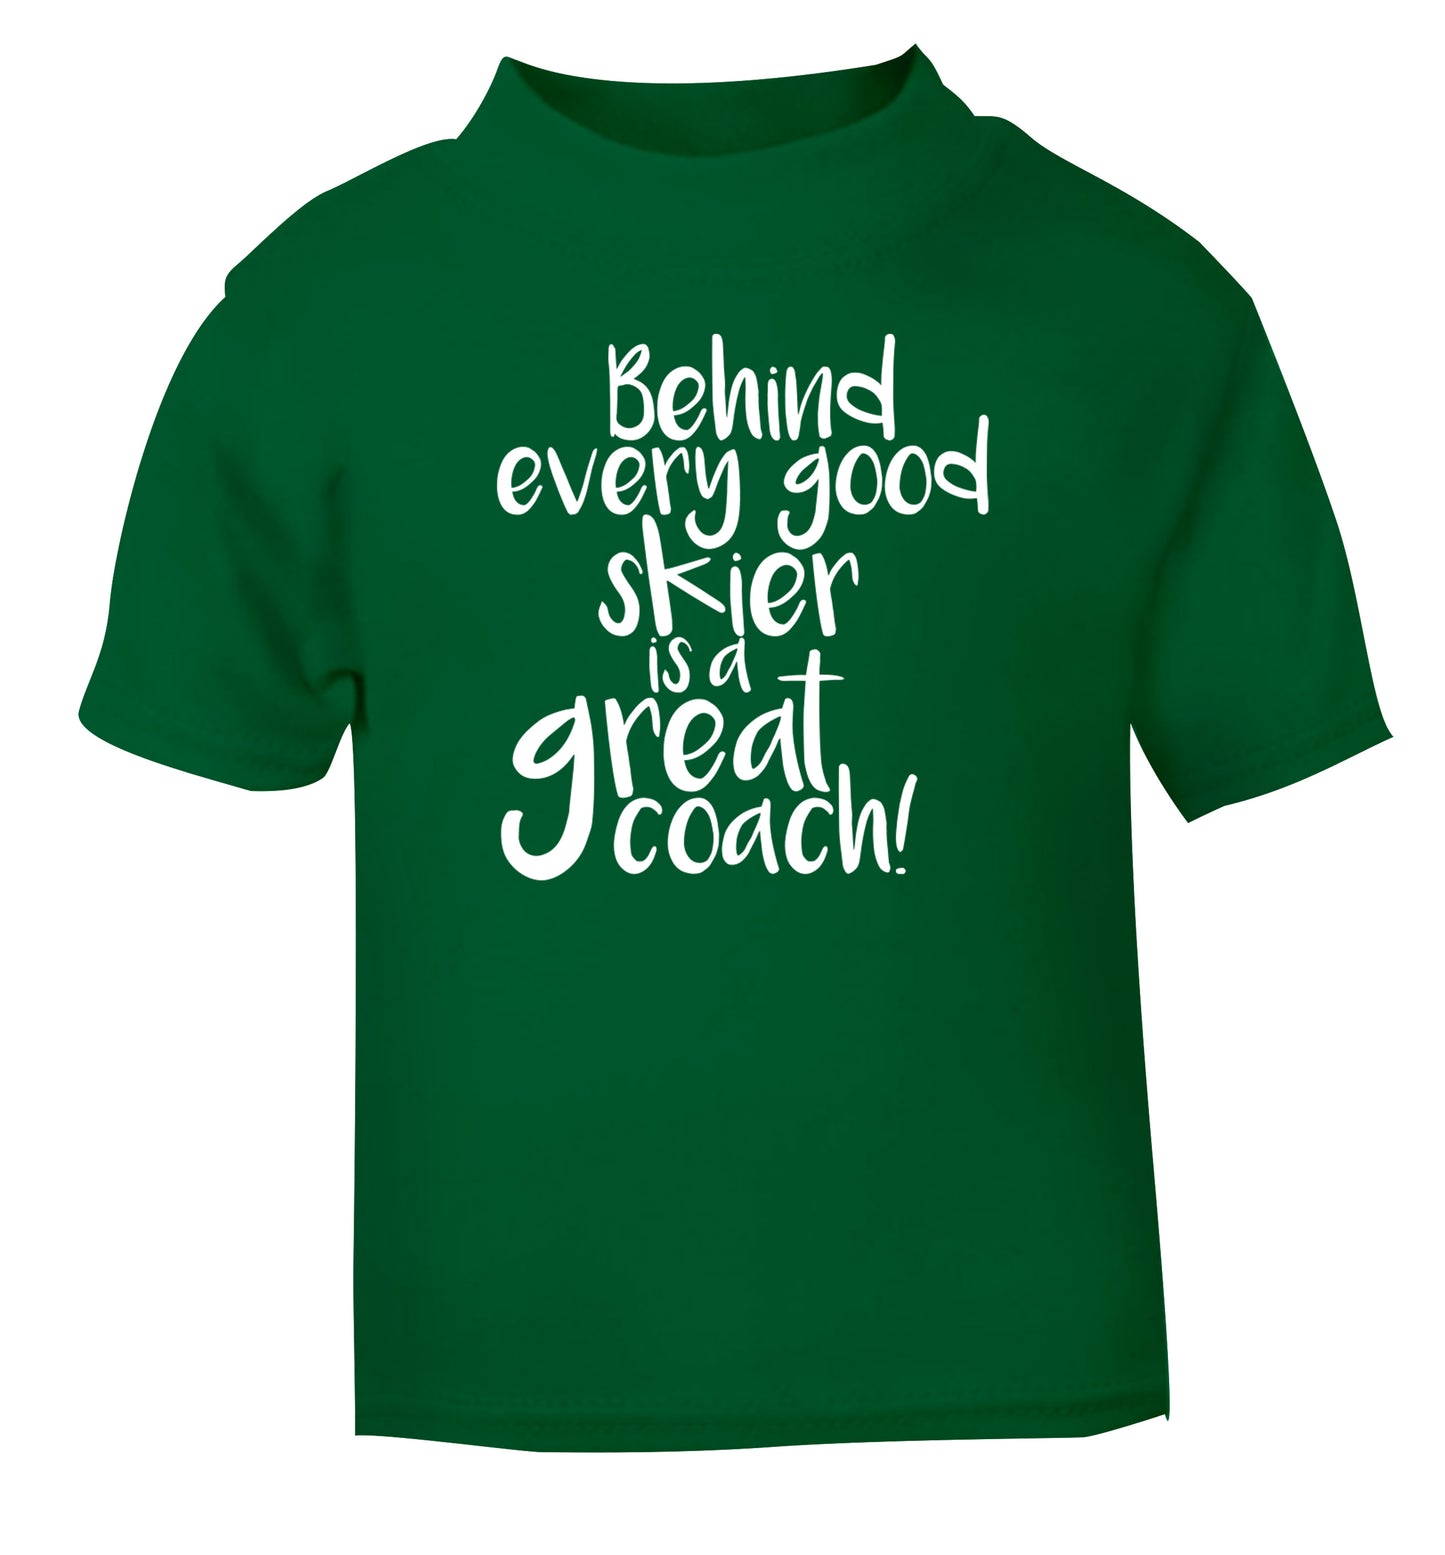 Behind every good skier is a great coach! green Baby Toddler Tshirt 2 Years